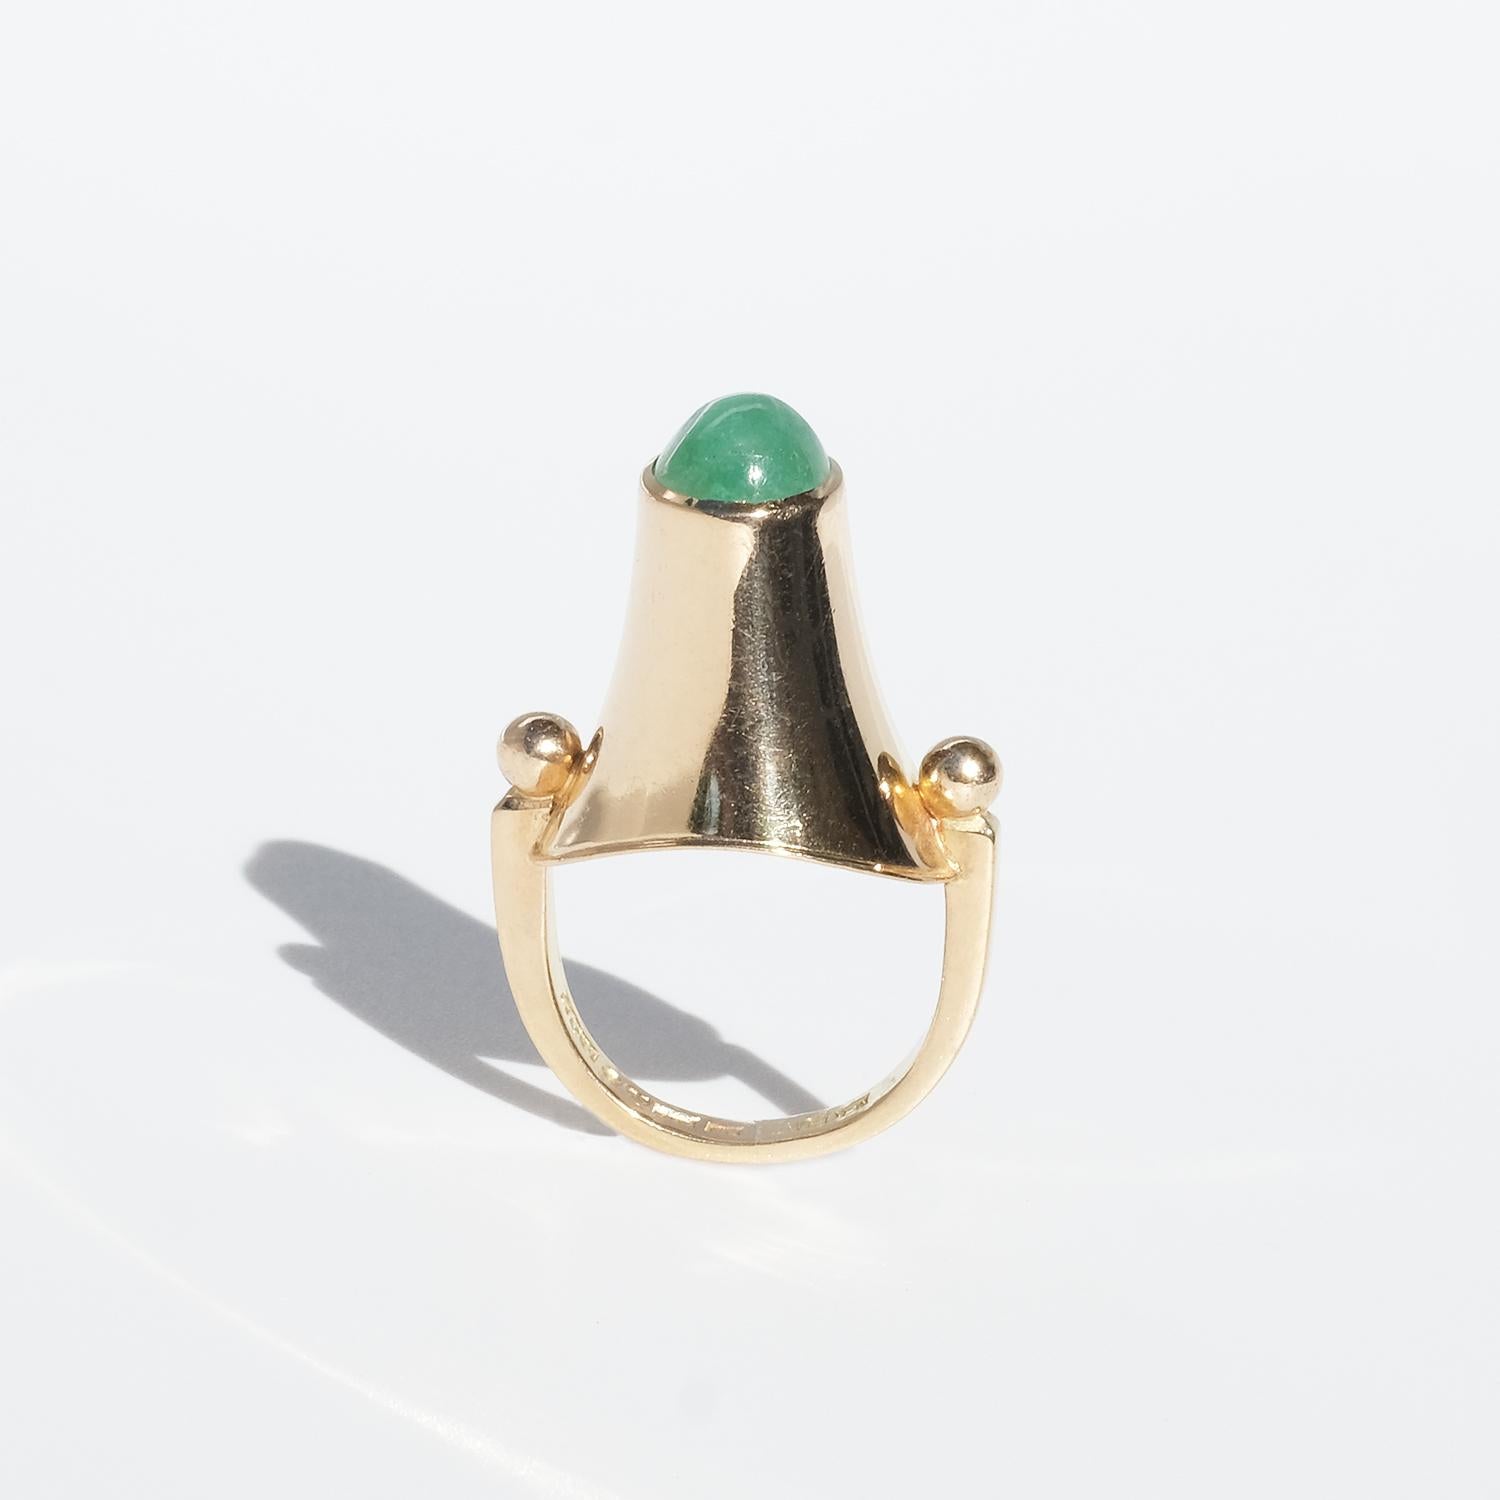 Swedish 18 K Gold Ring with an Emerald Made in 1966, Sigurd Persson 10